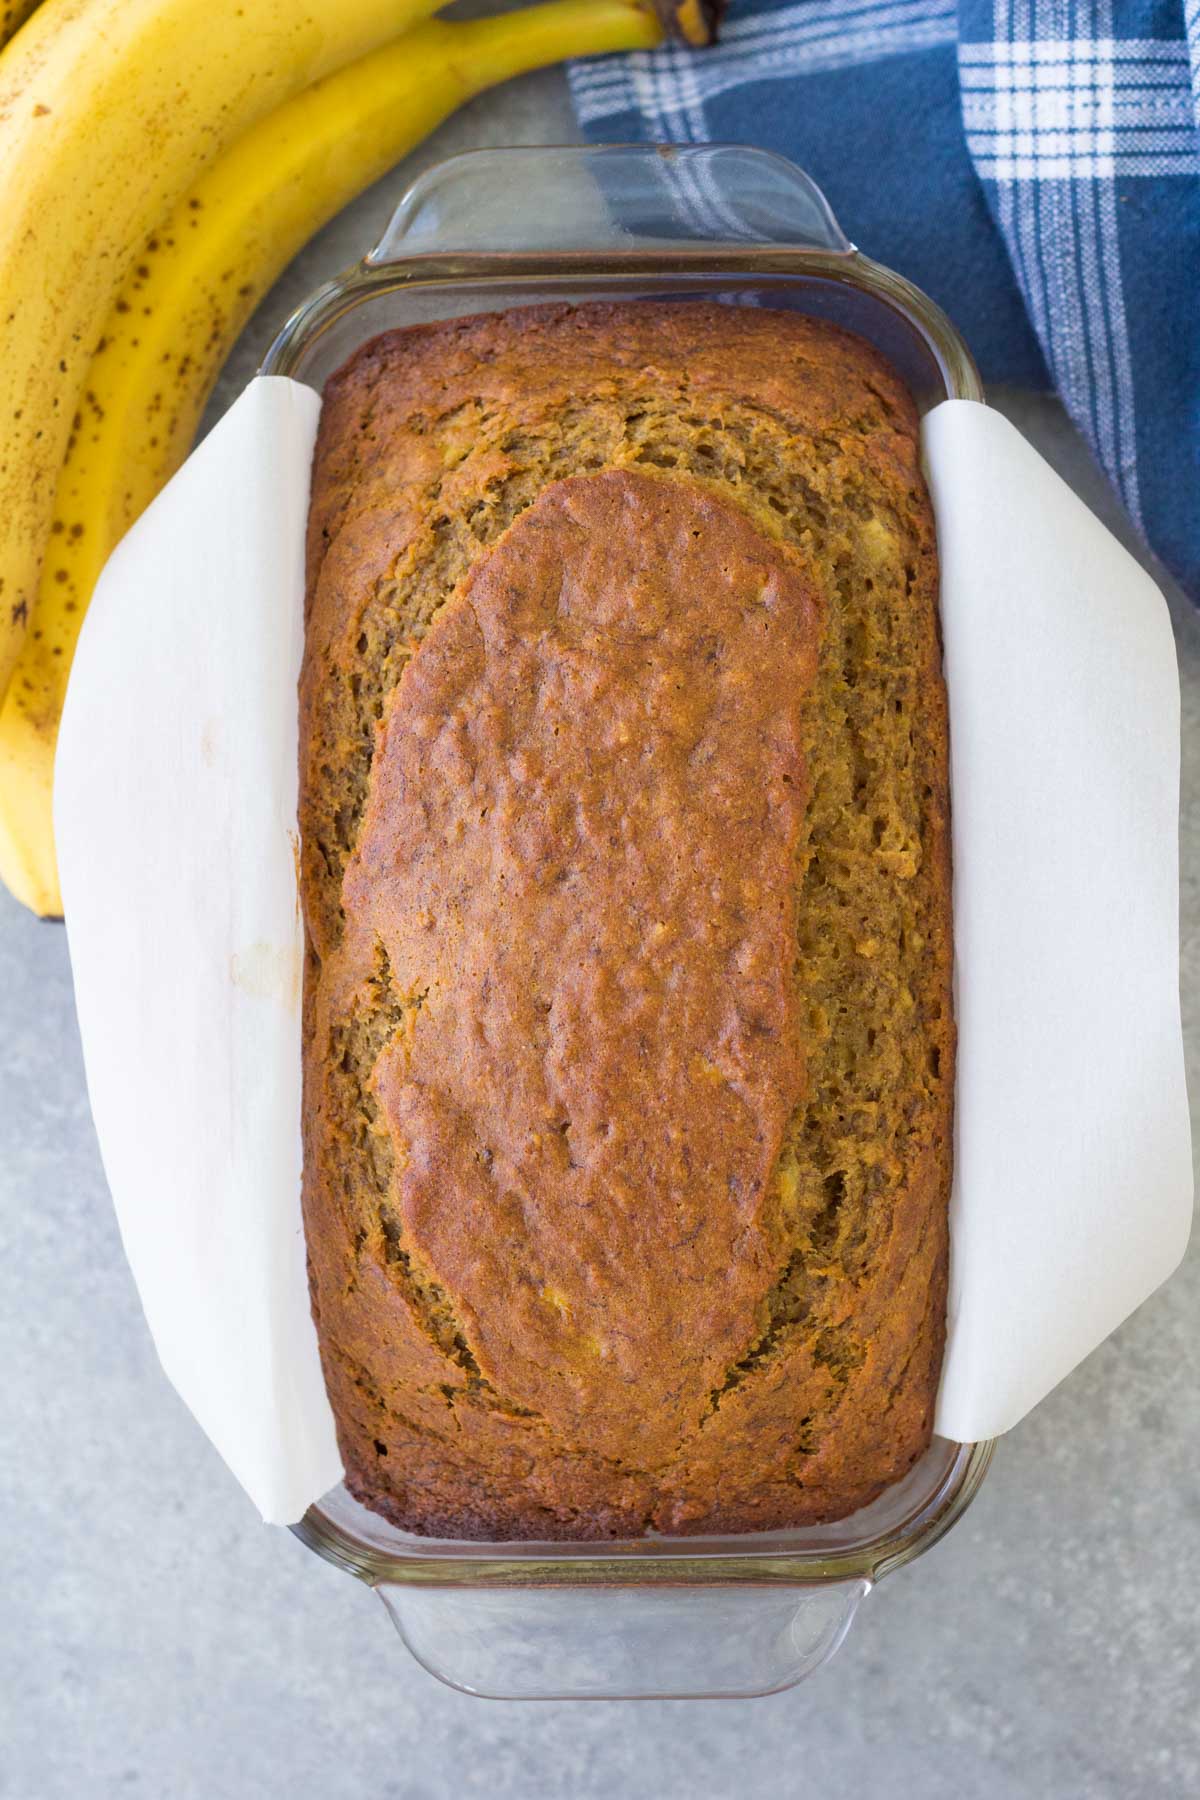 Baked loaf of banana bread in glass loaf pan lined with parchment paper.